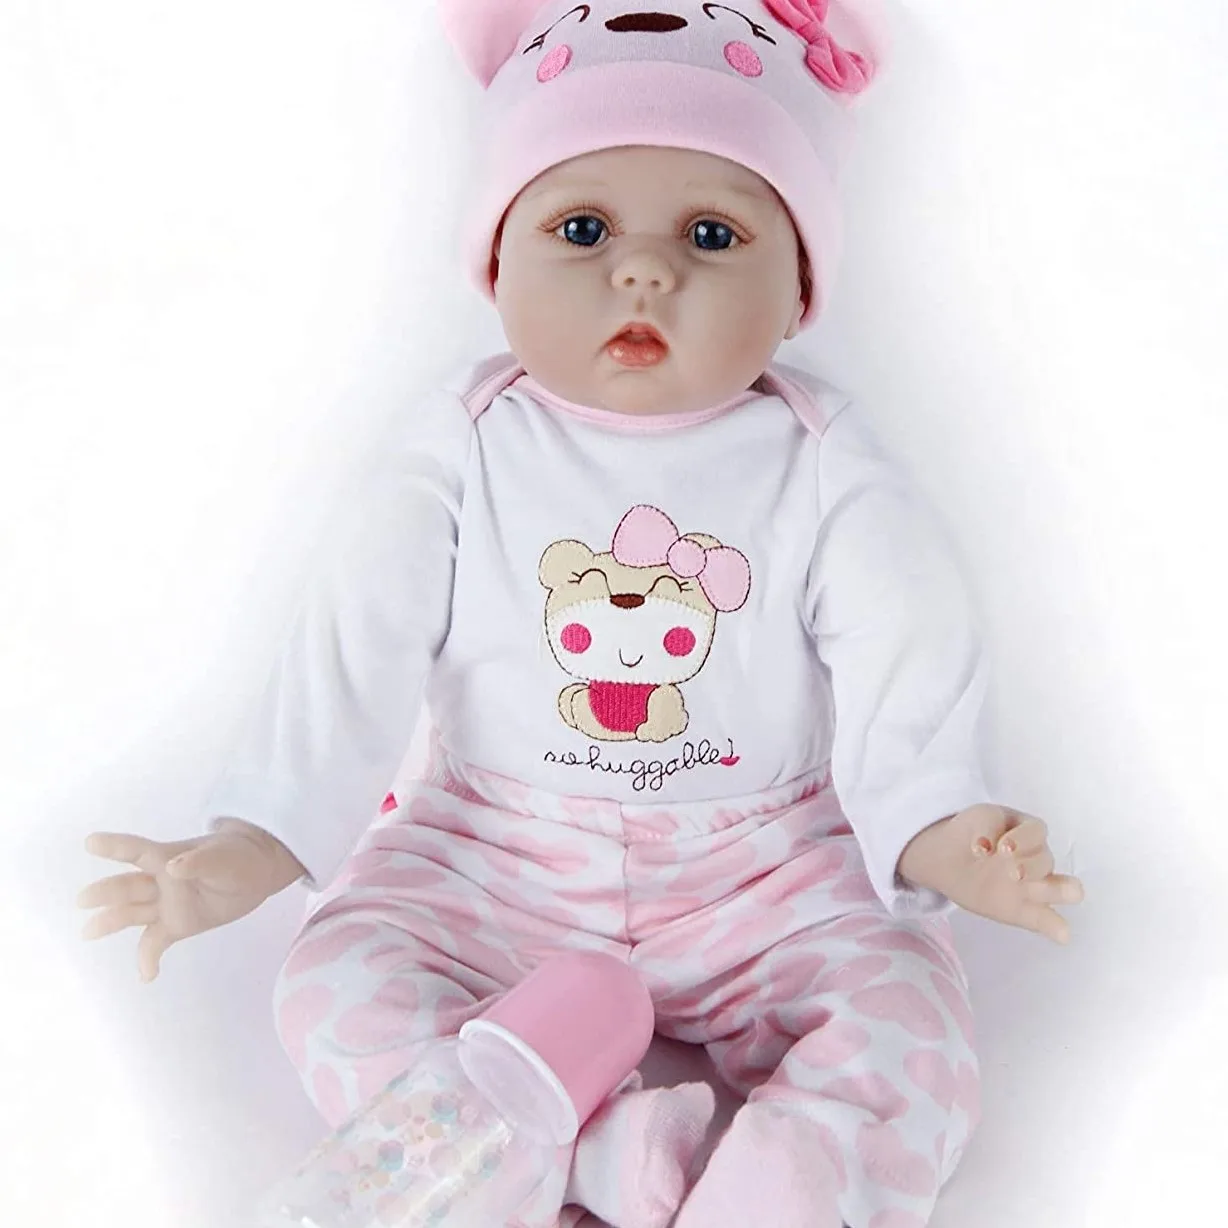 

Soft Vinyl Realistic Cute Baby Doll Reborn Open/Close Eyes Infant Toddler Full Cloth Body Unisex 22 Inches 55cm